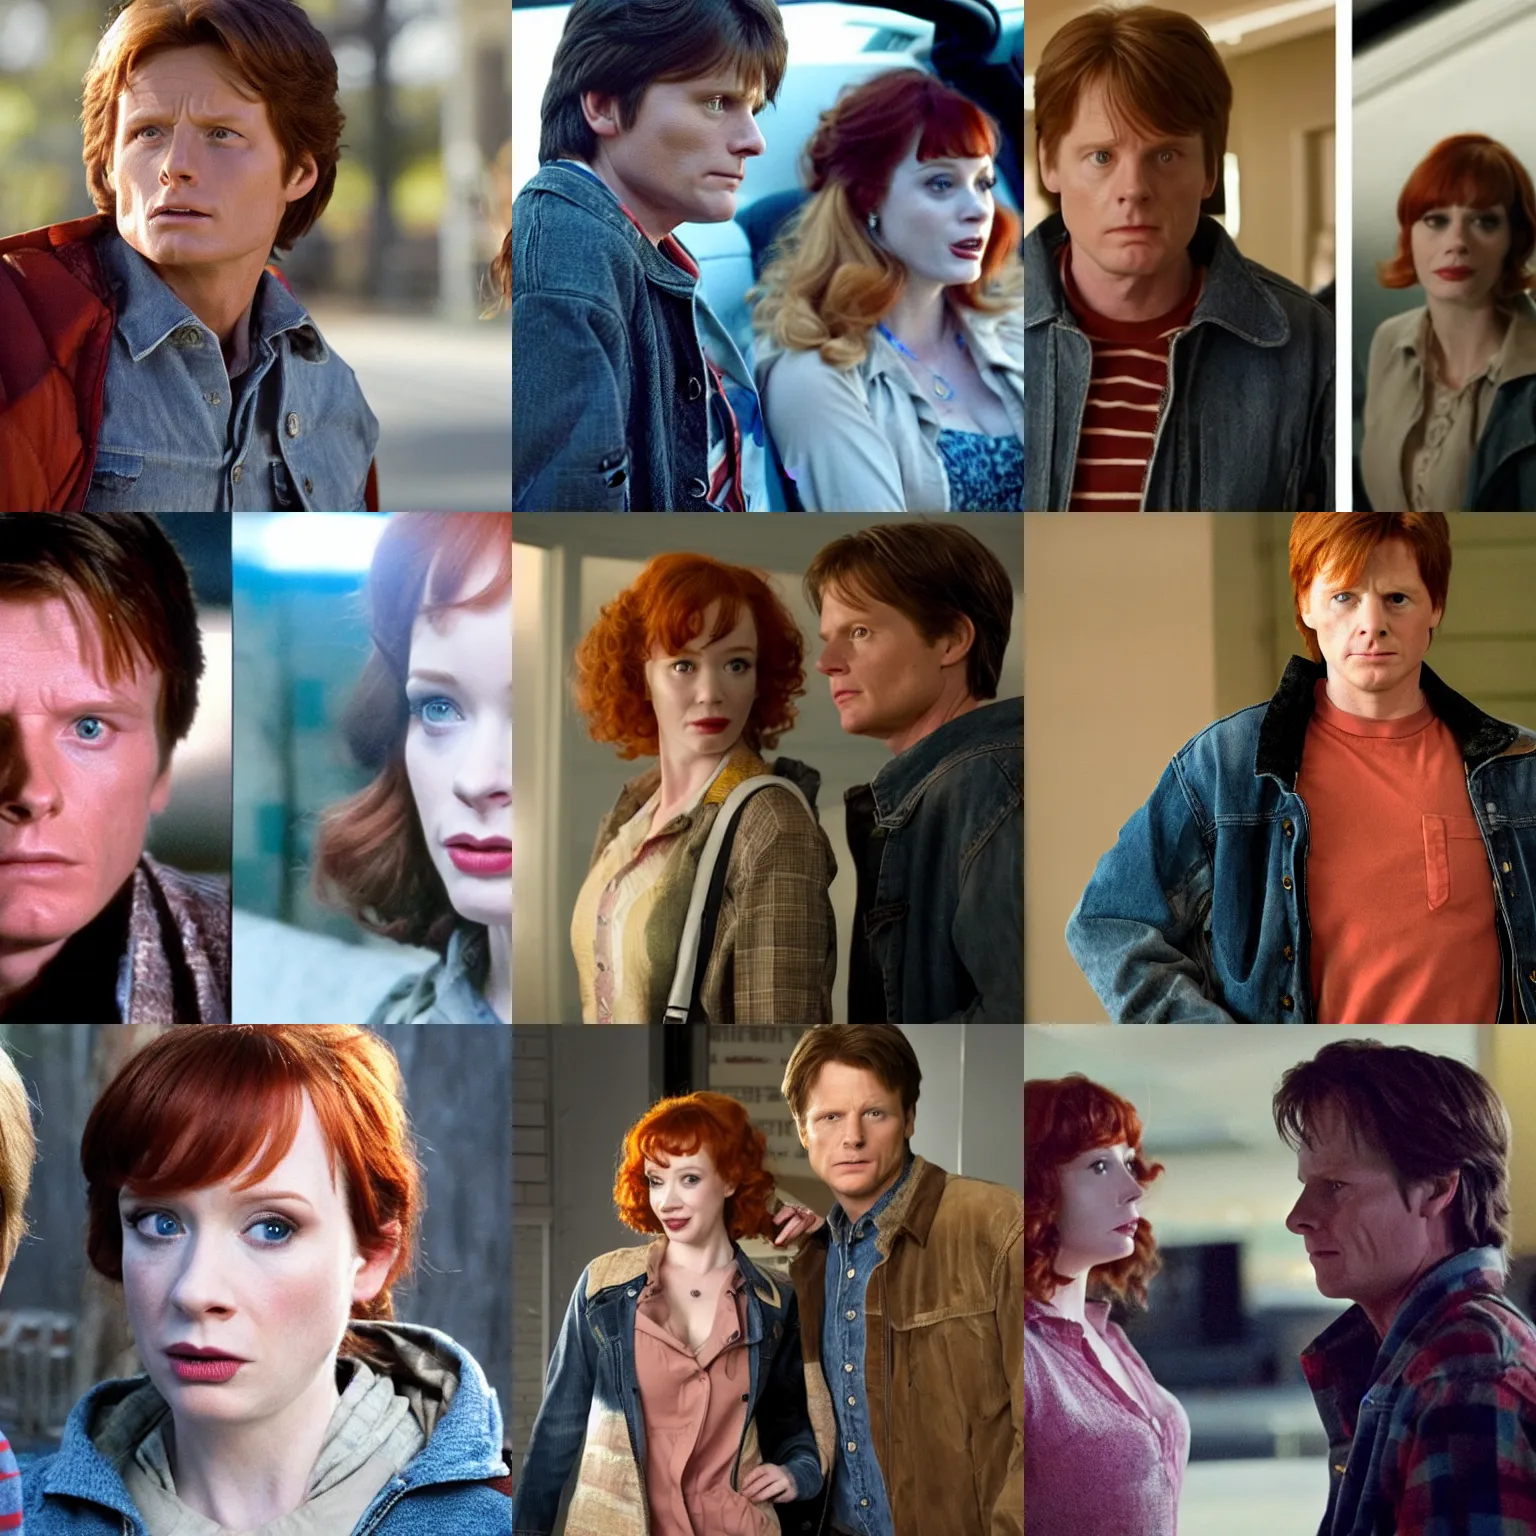 Prompt: marty mcfly played by christina hendricks, detailed face, movie still back to the future, denis villeneuve